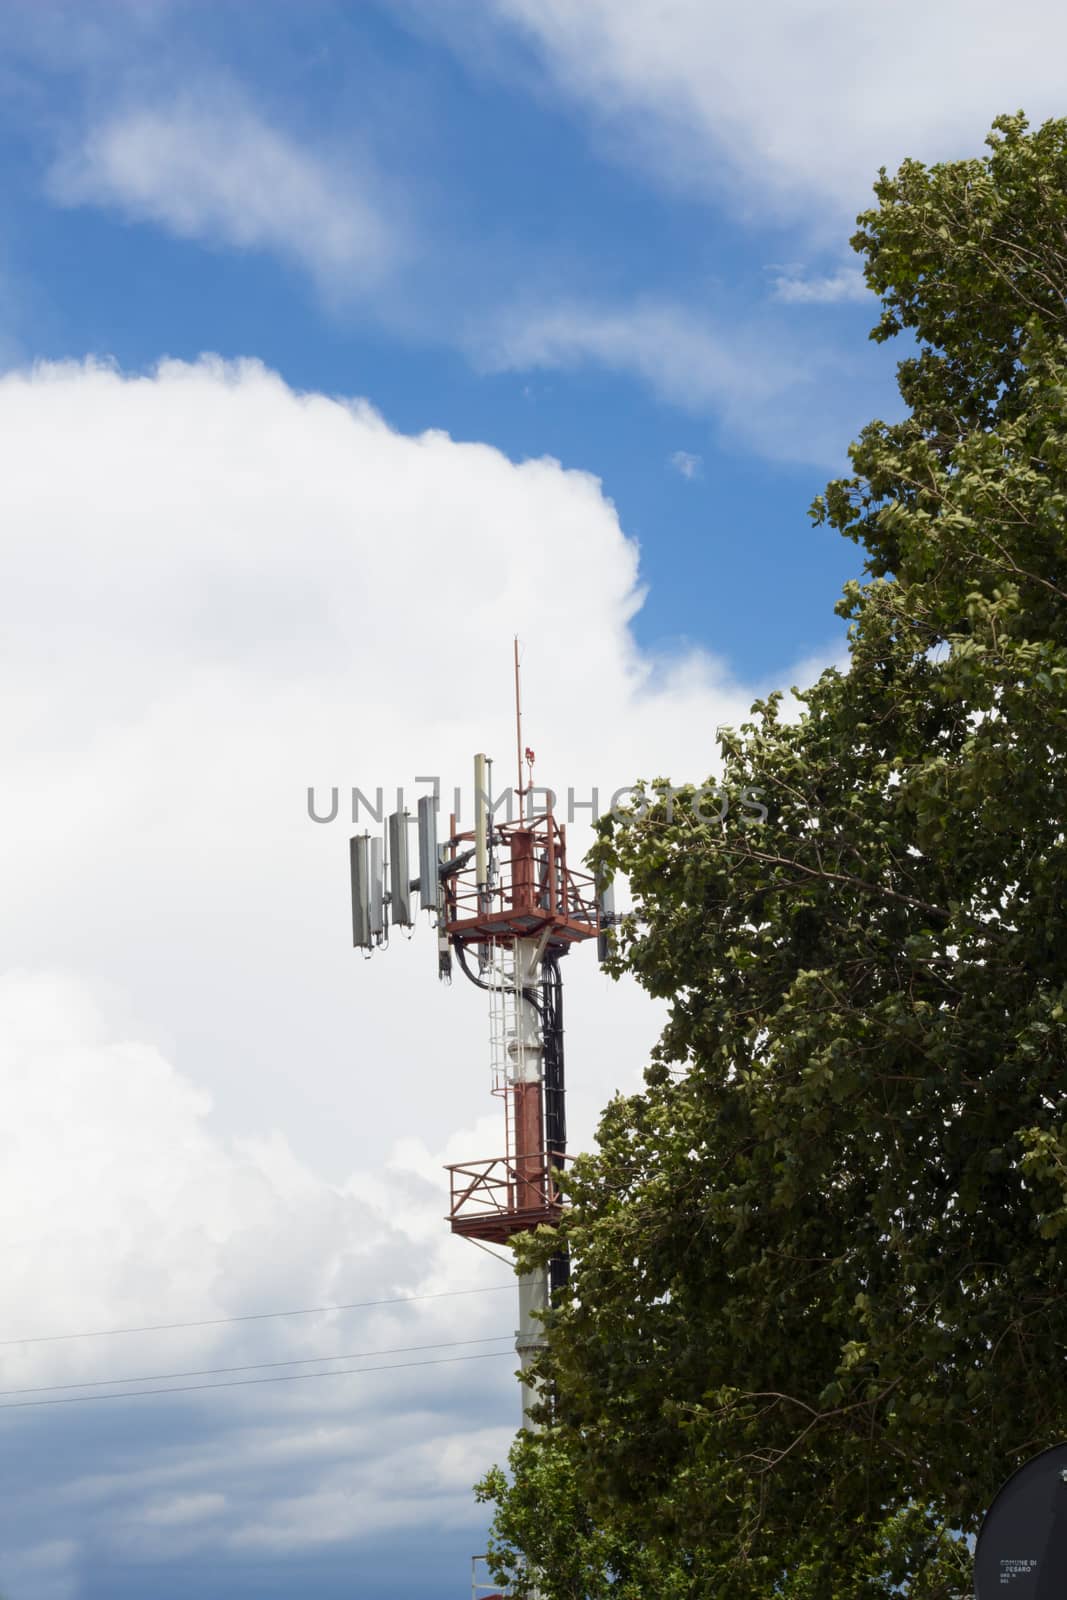 Communications Tower in the park